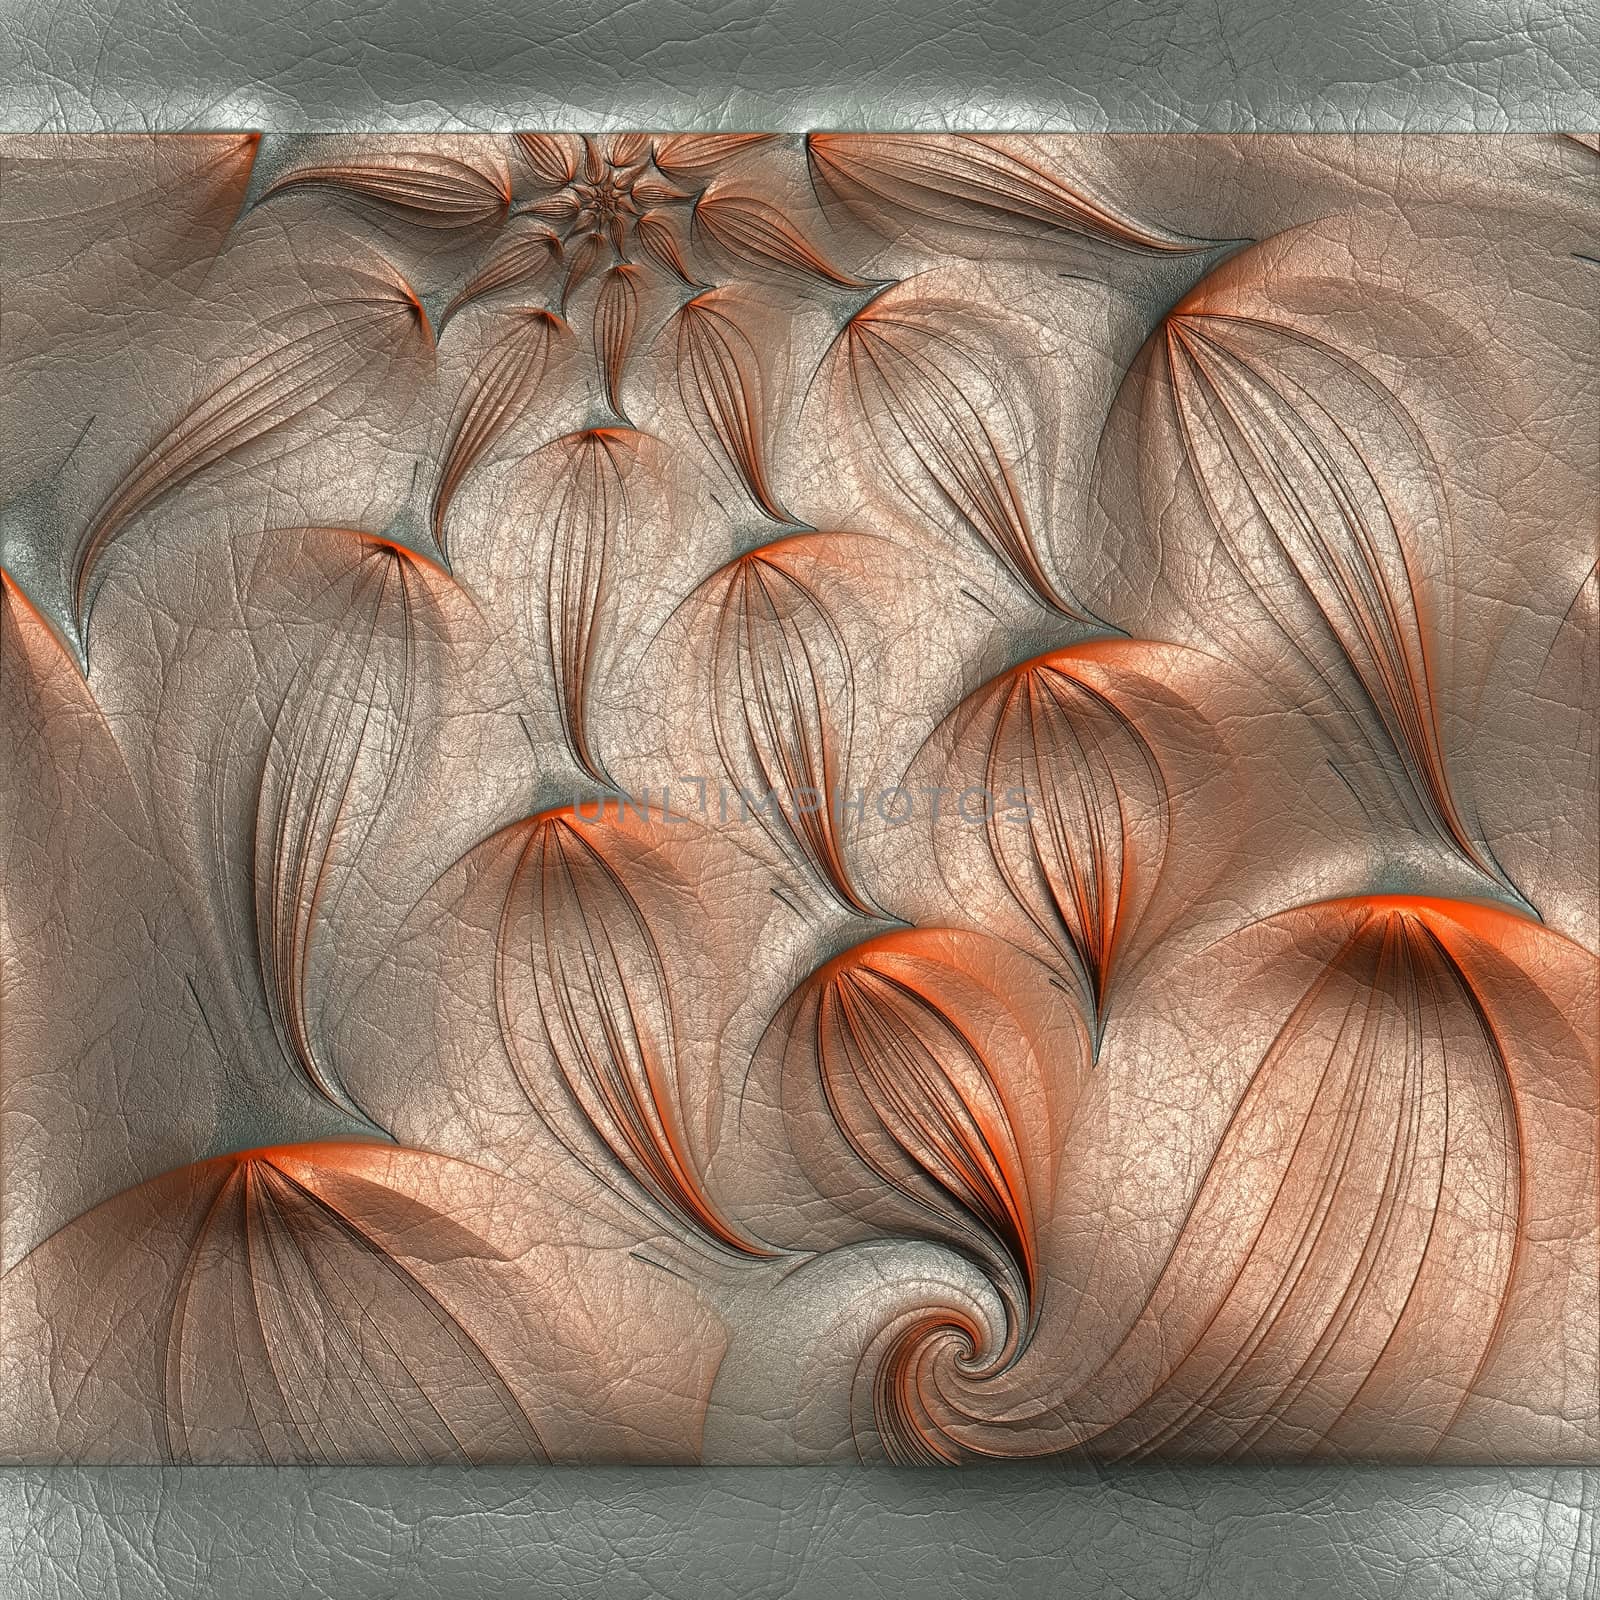 Luxury background with embossed pattern on leather for creative design